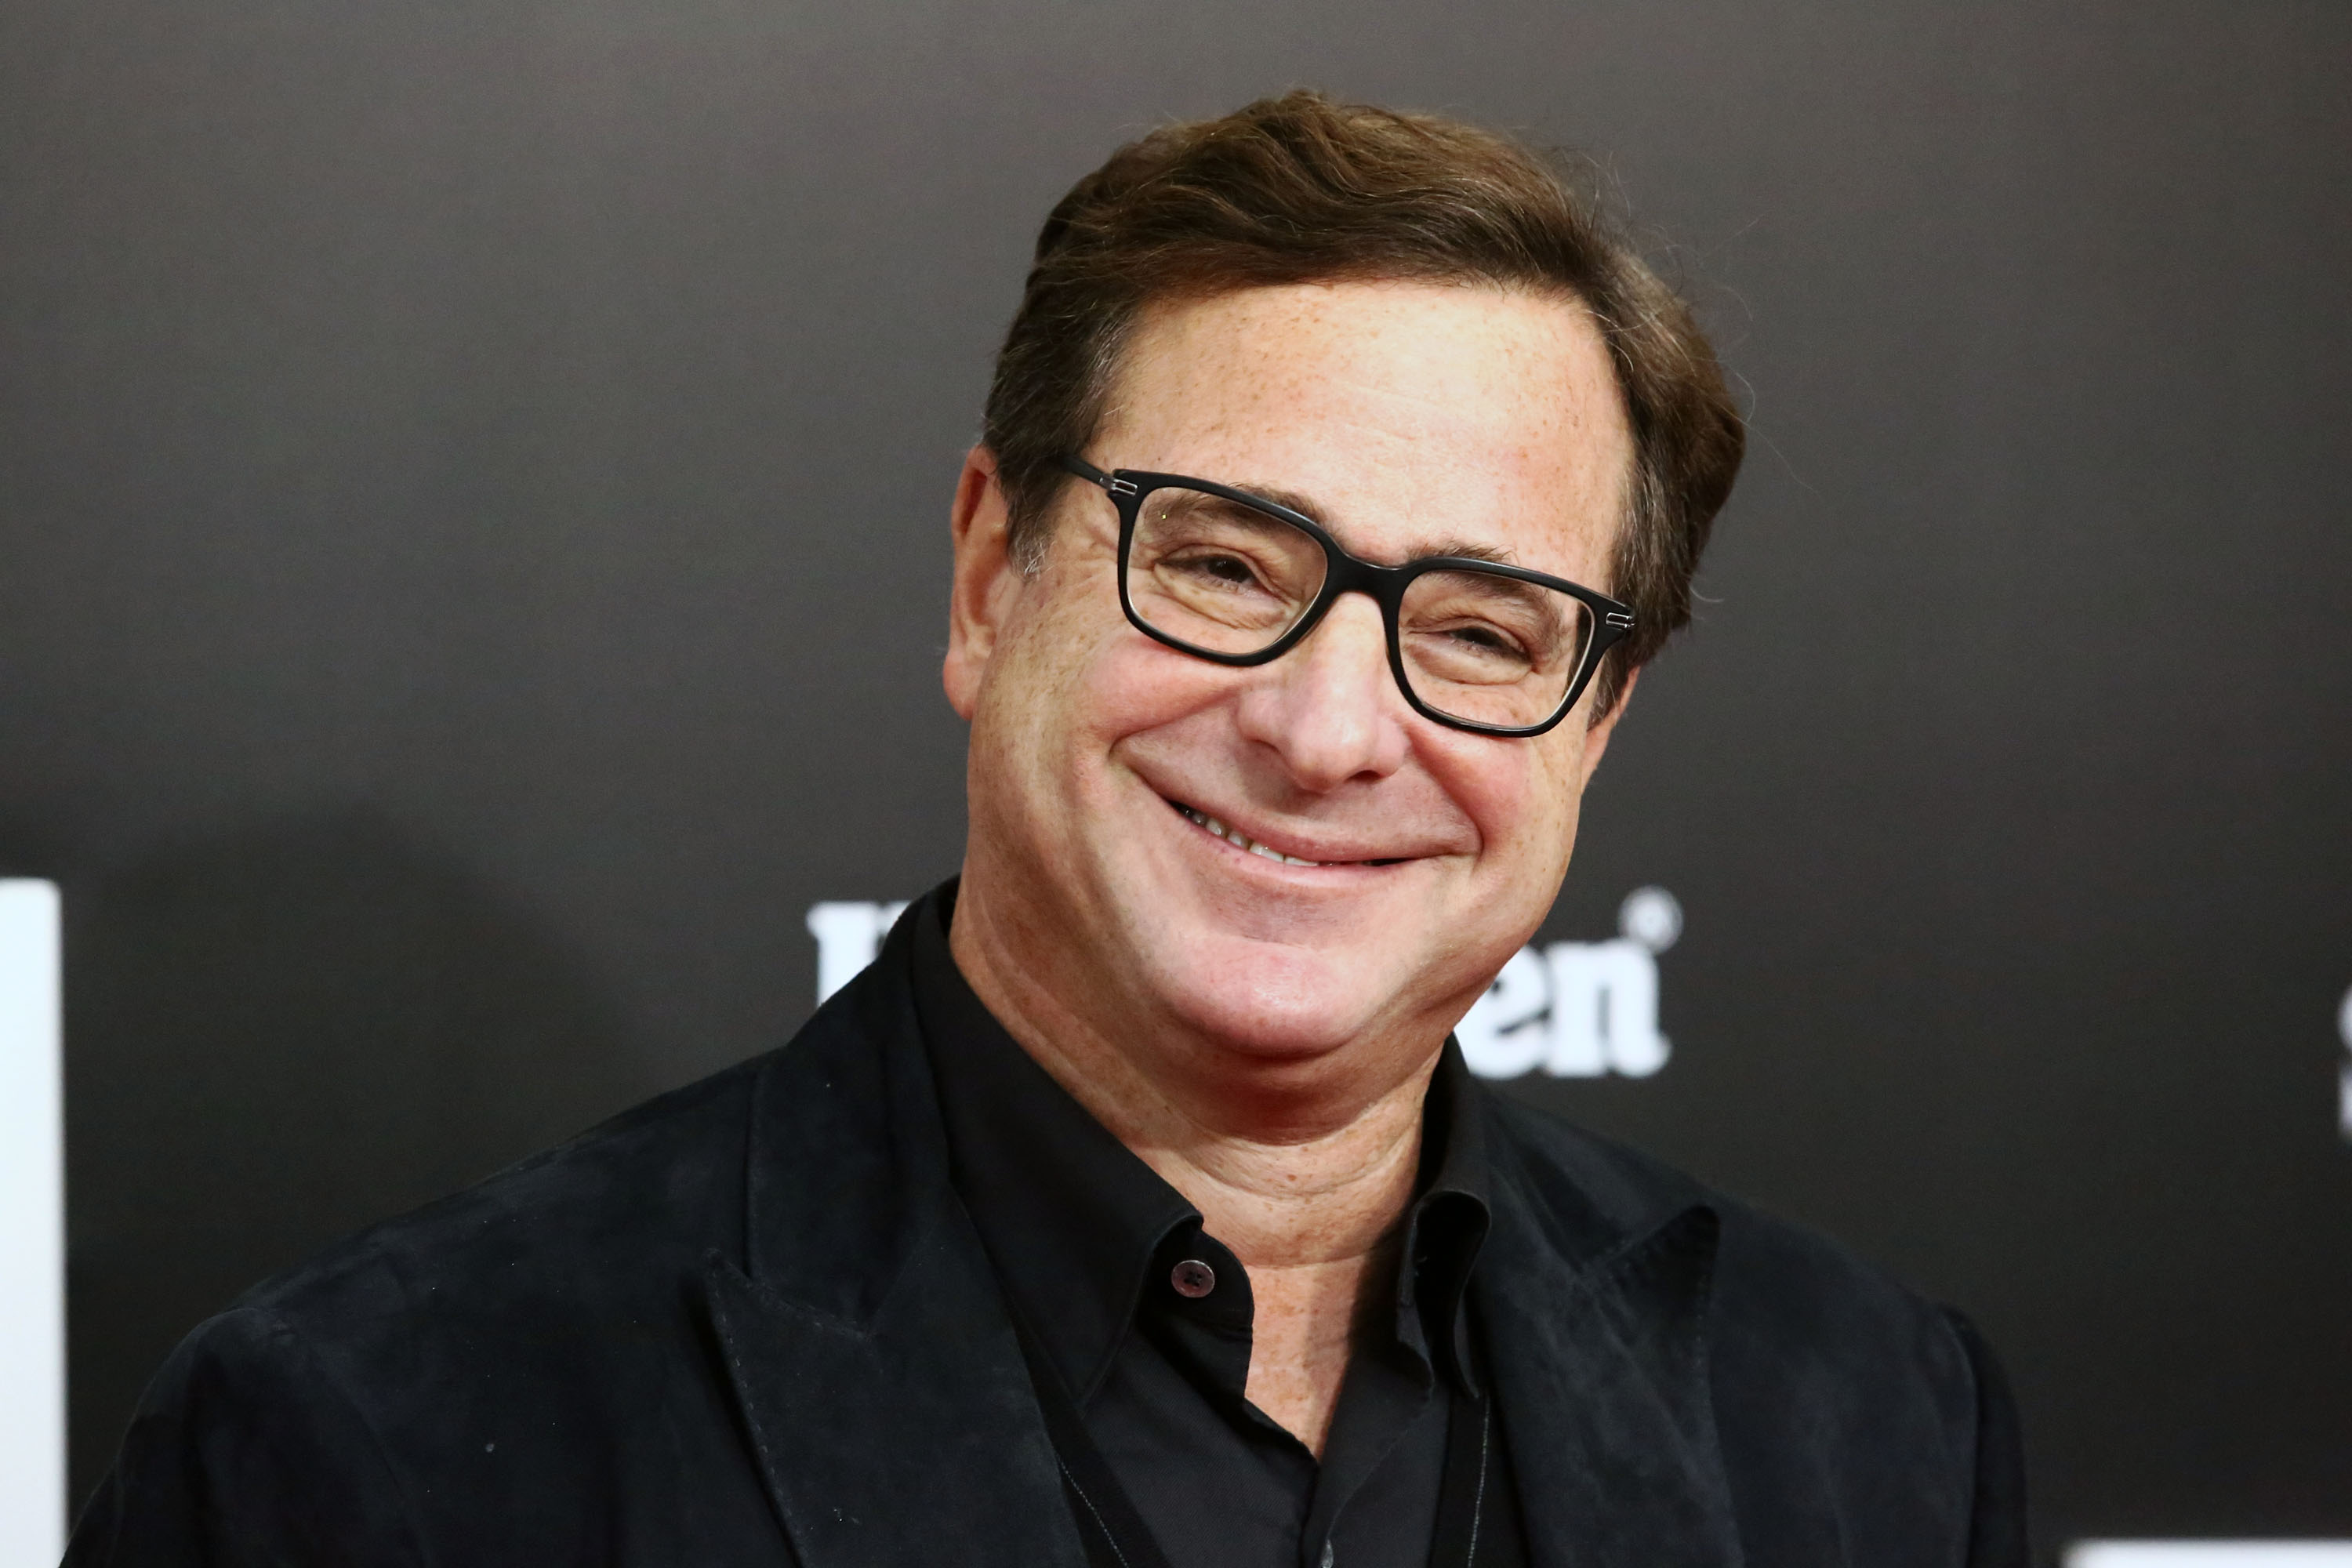 Actor Bob Saget attends "The Big Short" New York premiere at Ziegfeld Theater on November 23, 2015 in New York City. | Source: Getty Images